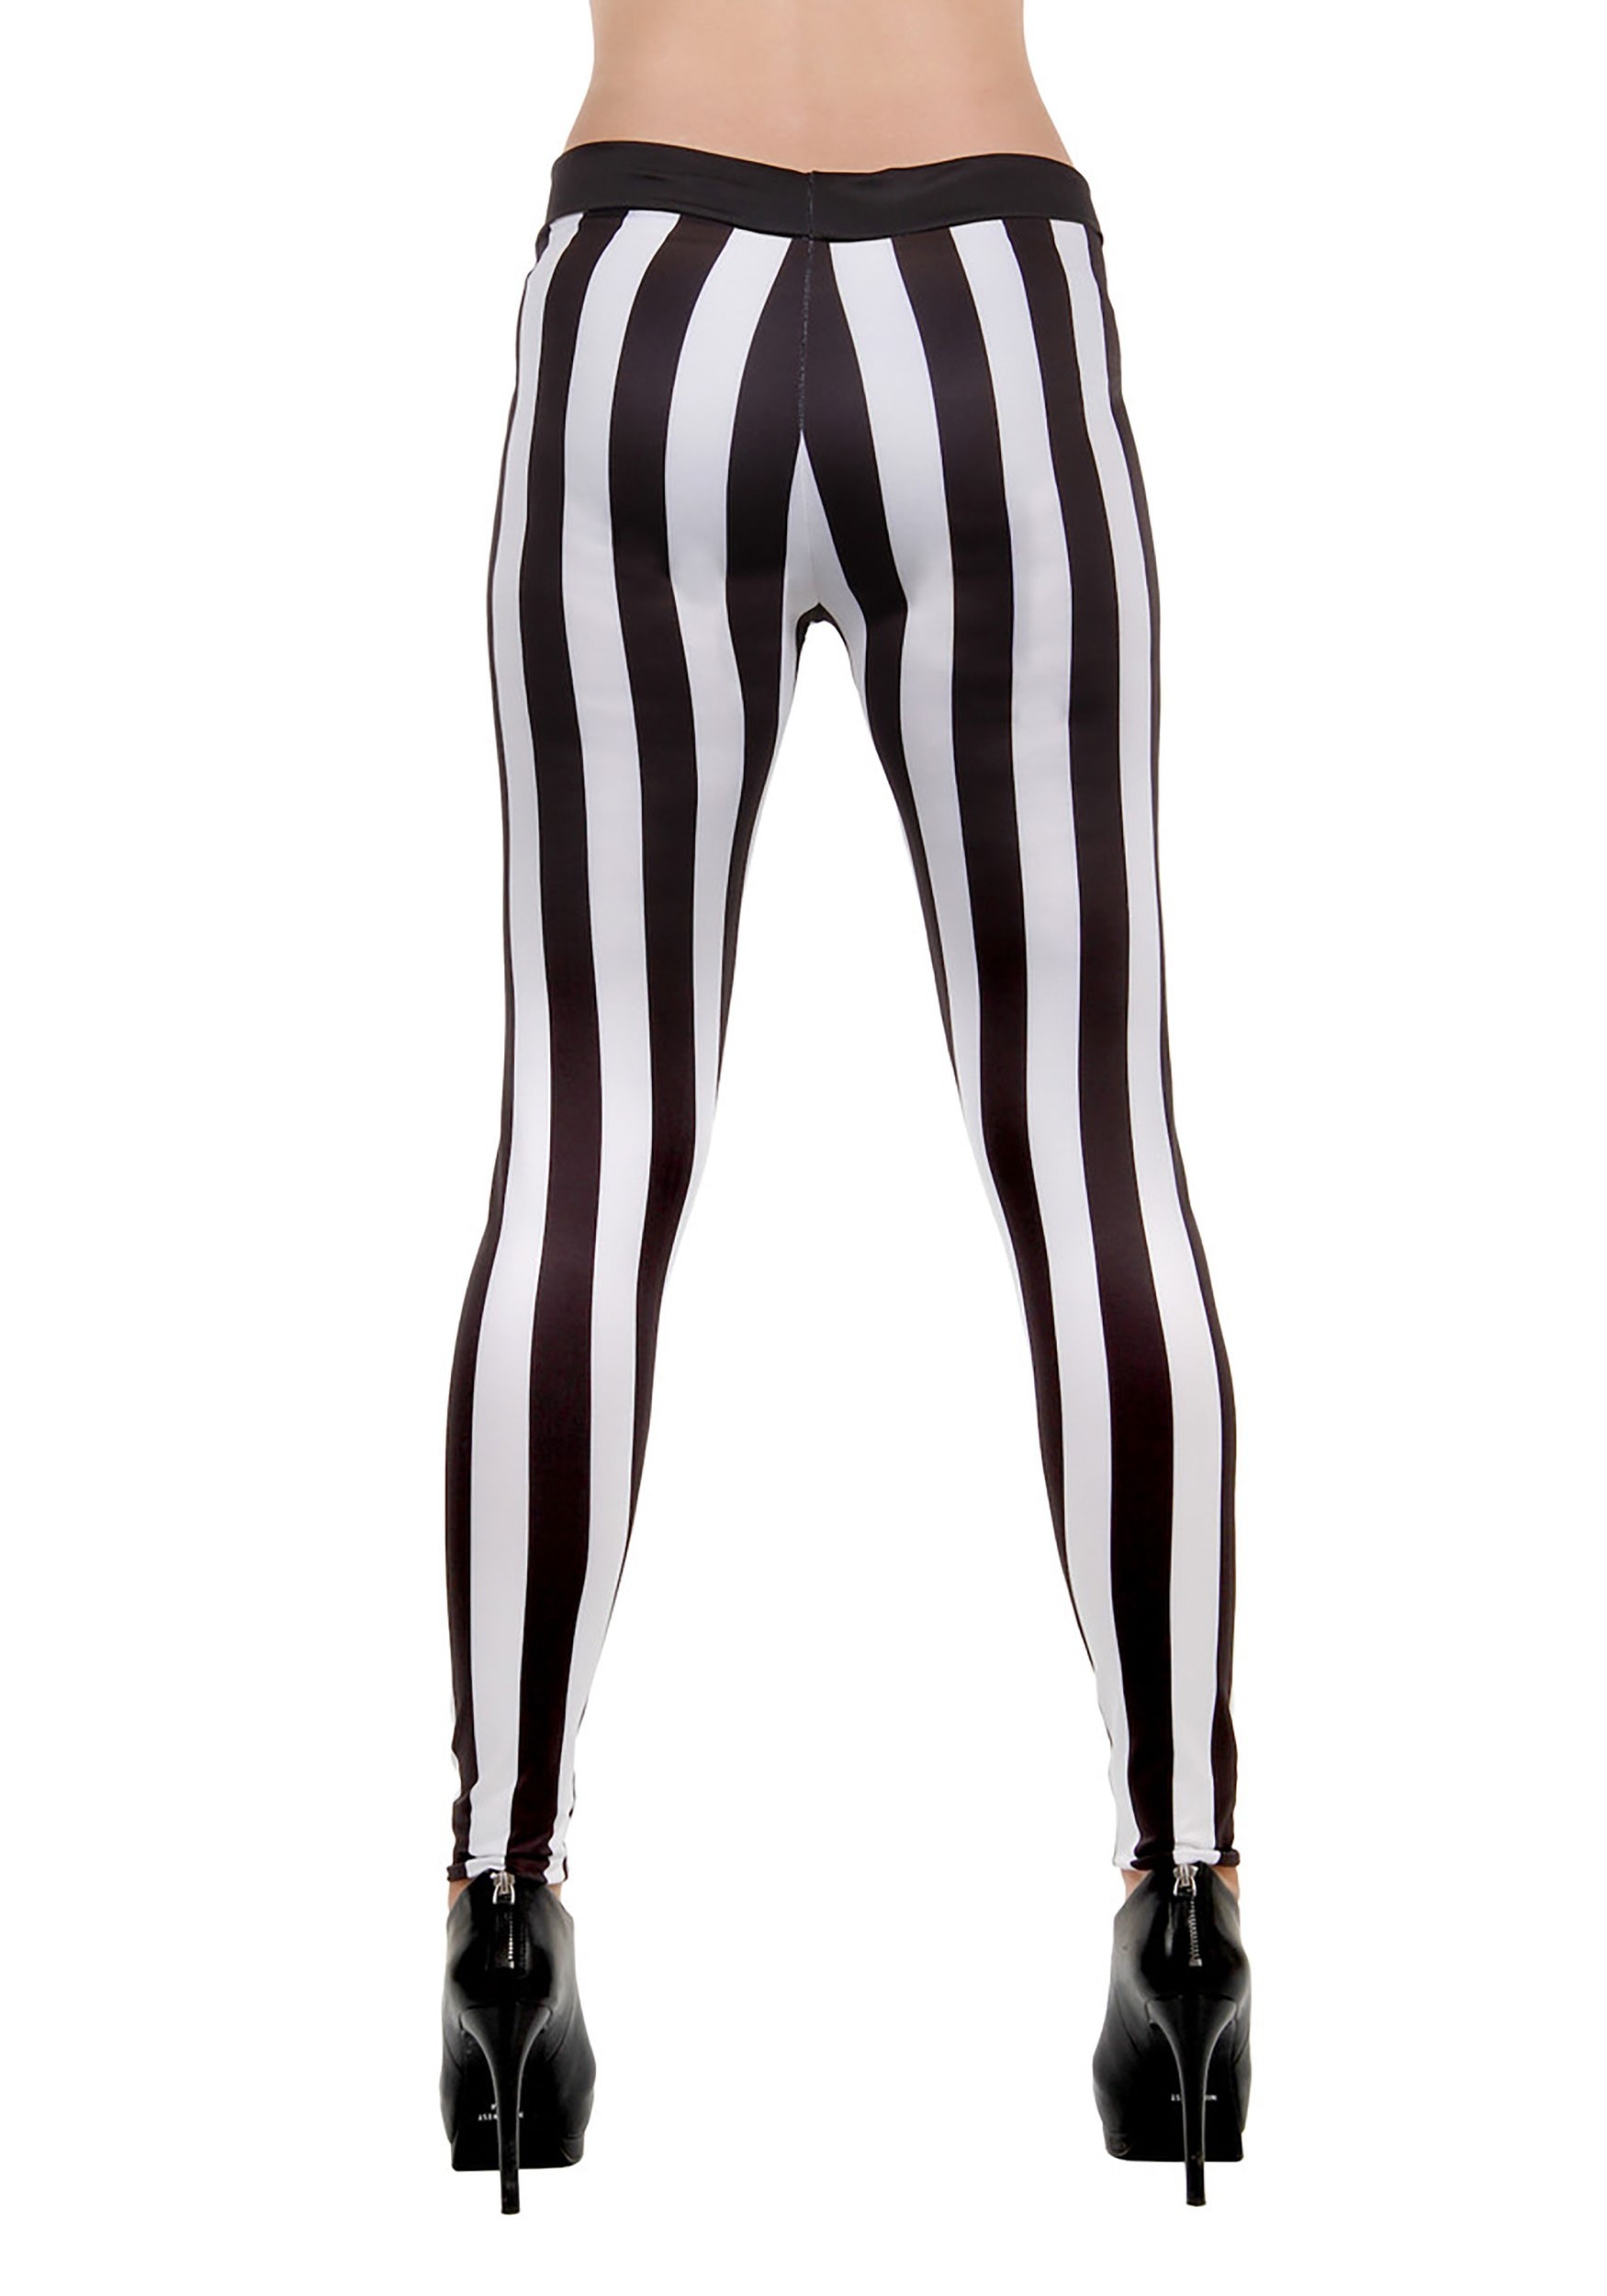 https://images.halloweencostumes.ca/products/69235/2-1-159341/striped-leggings-one-size-alt-1.jpg